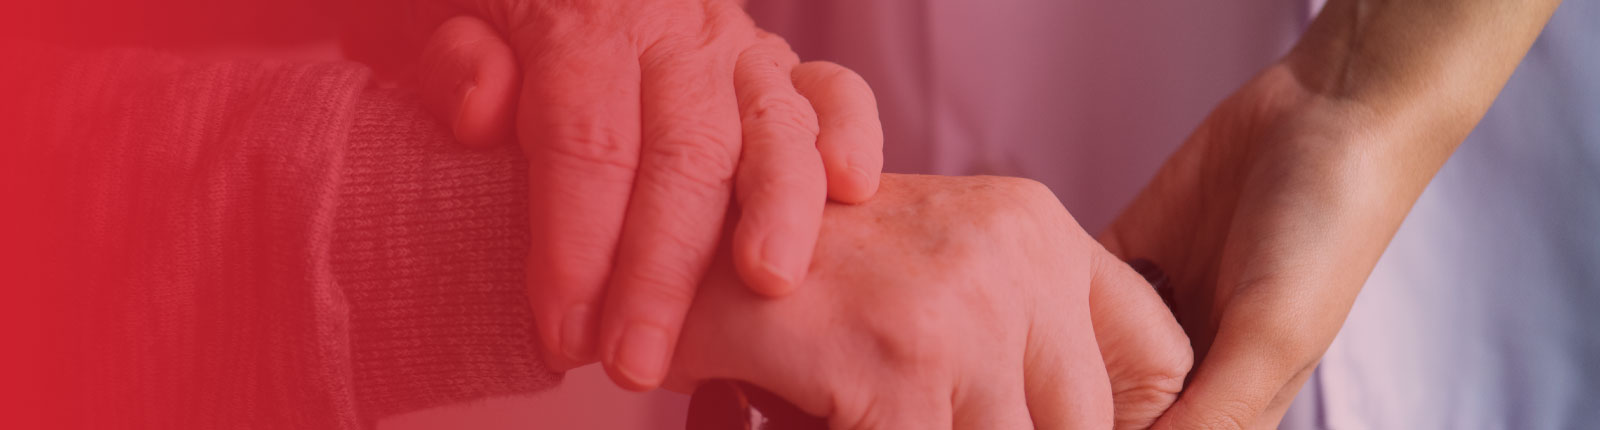 assisted living employee holding residents hands